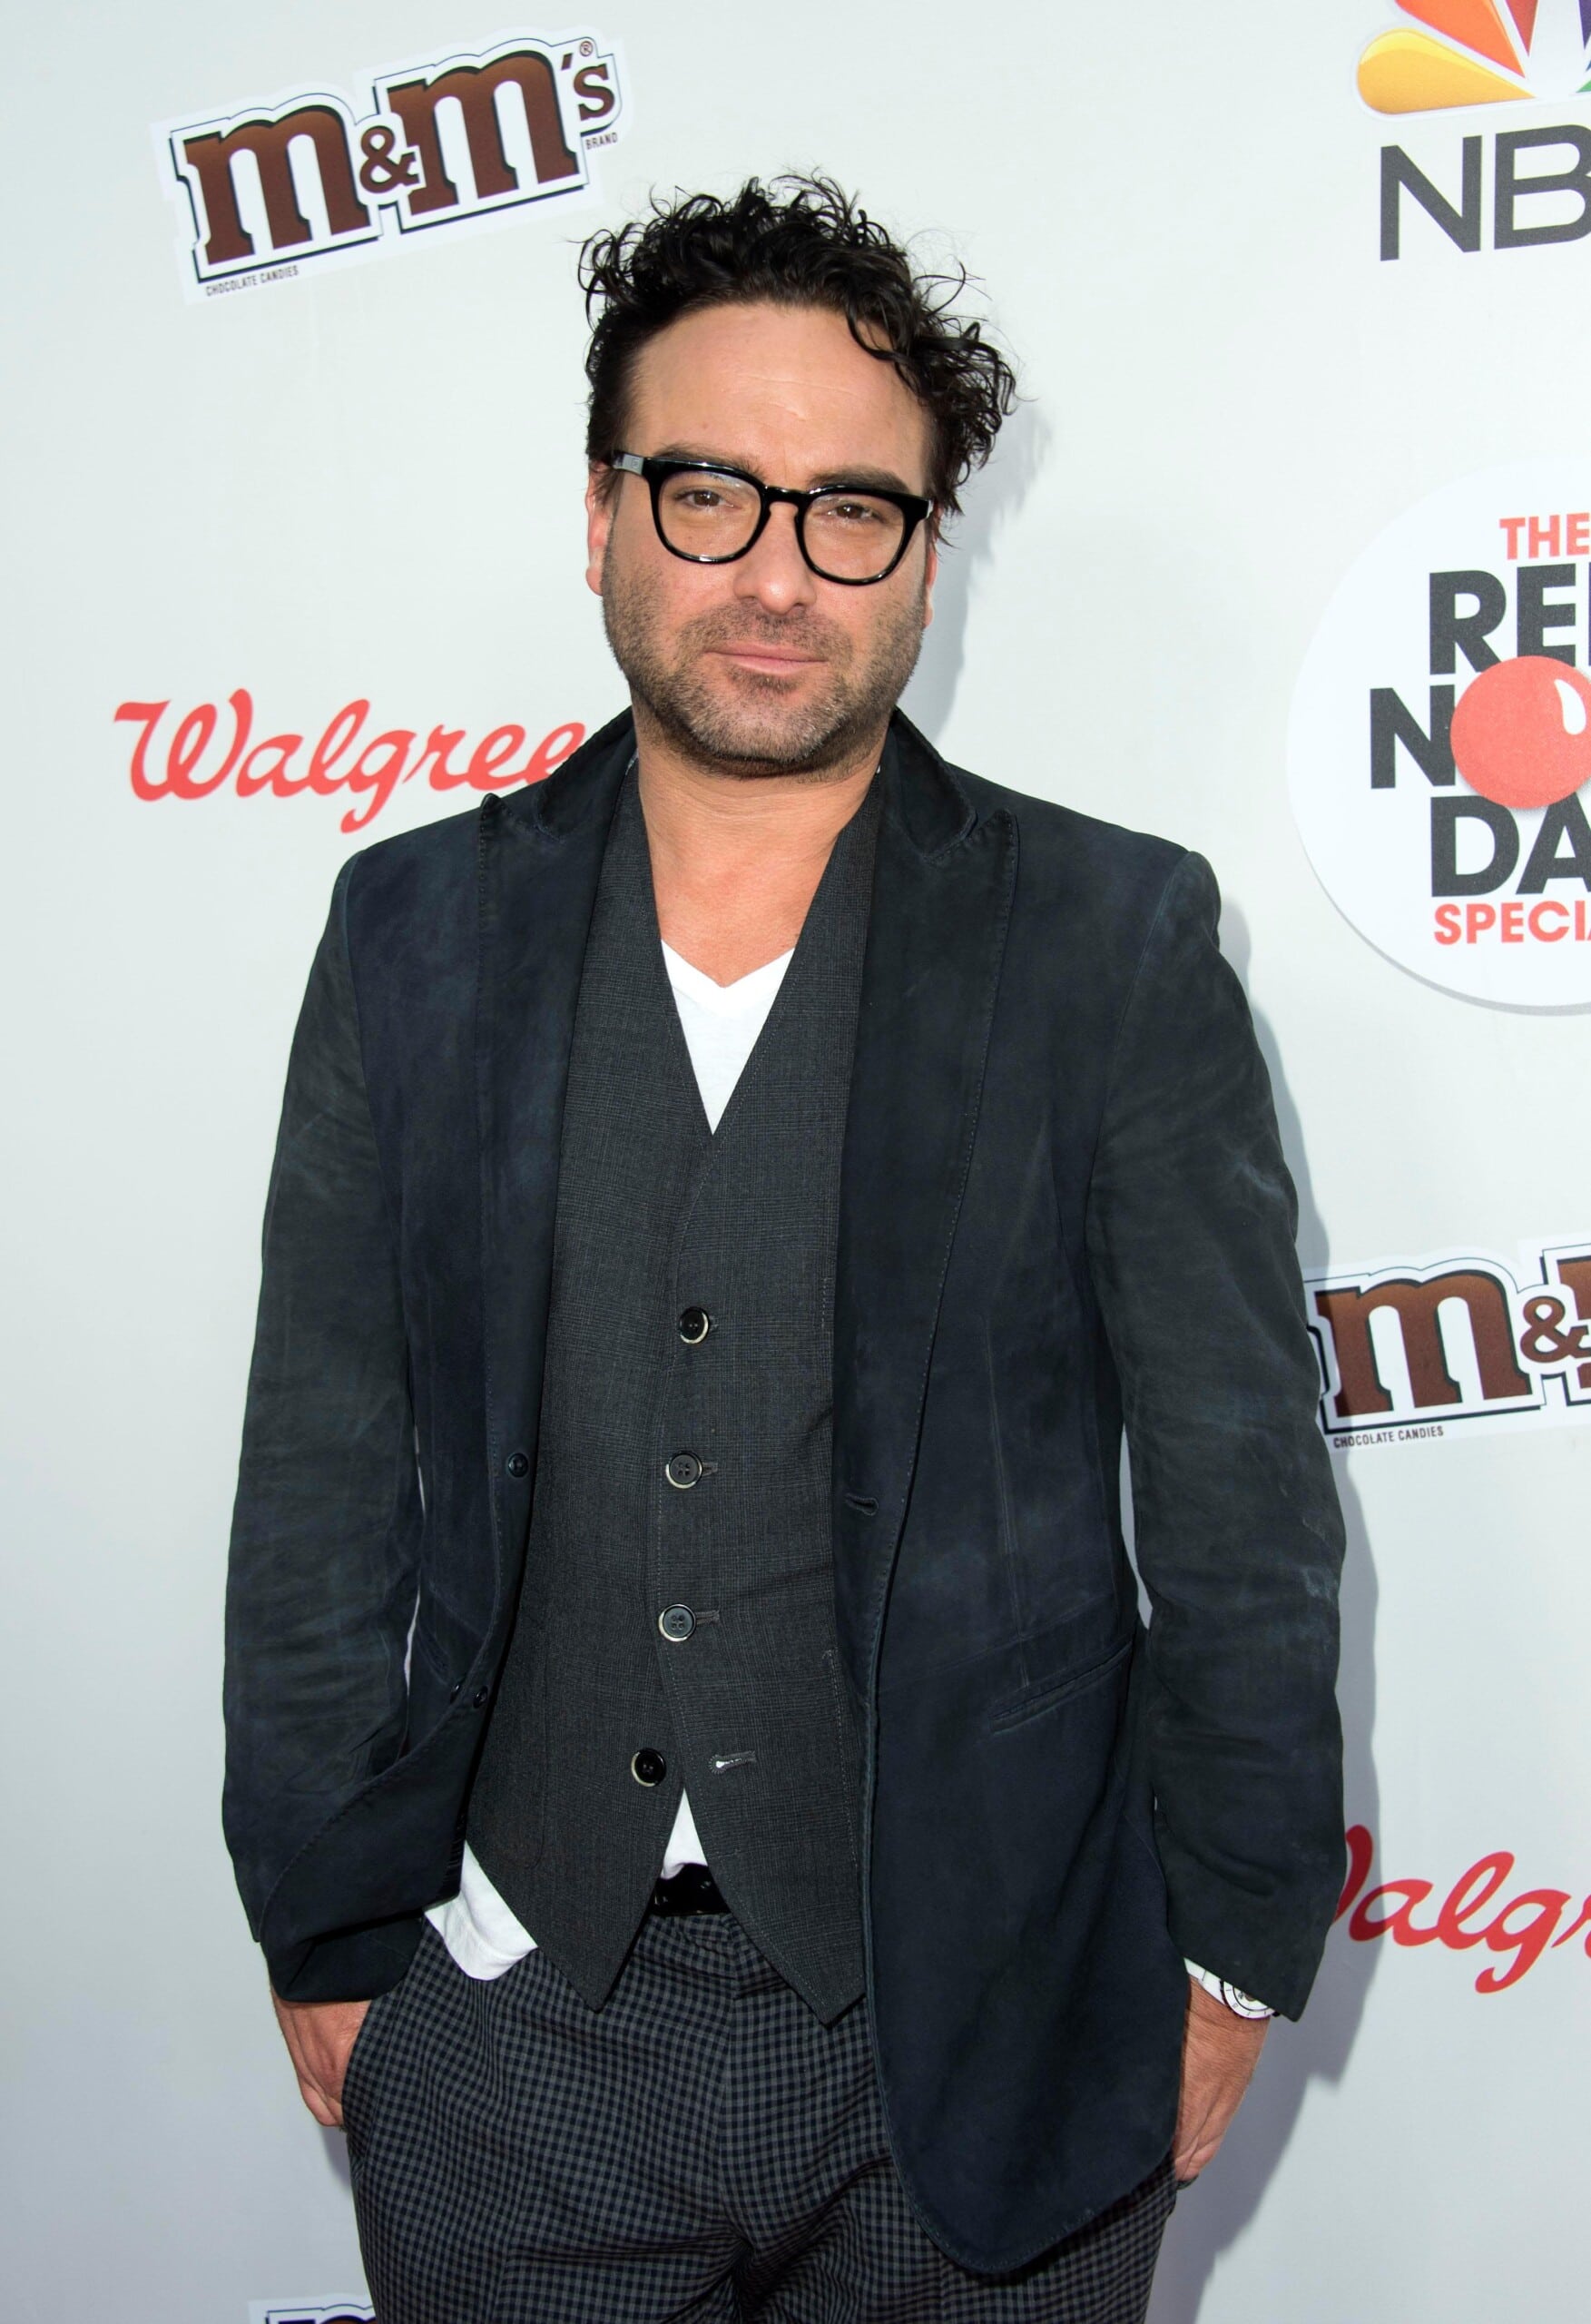 Johnny Galecki Net Worth Learn Interesting Facts About The Big Bang